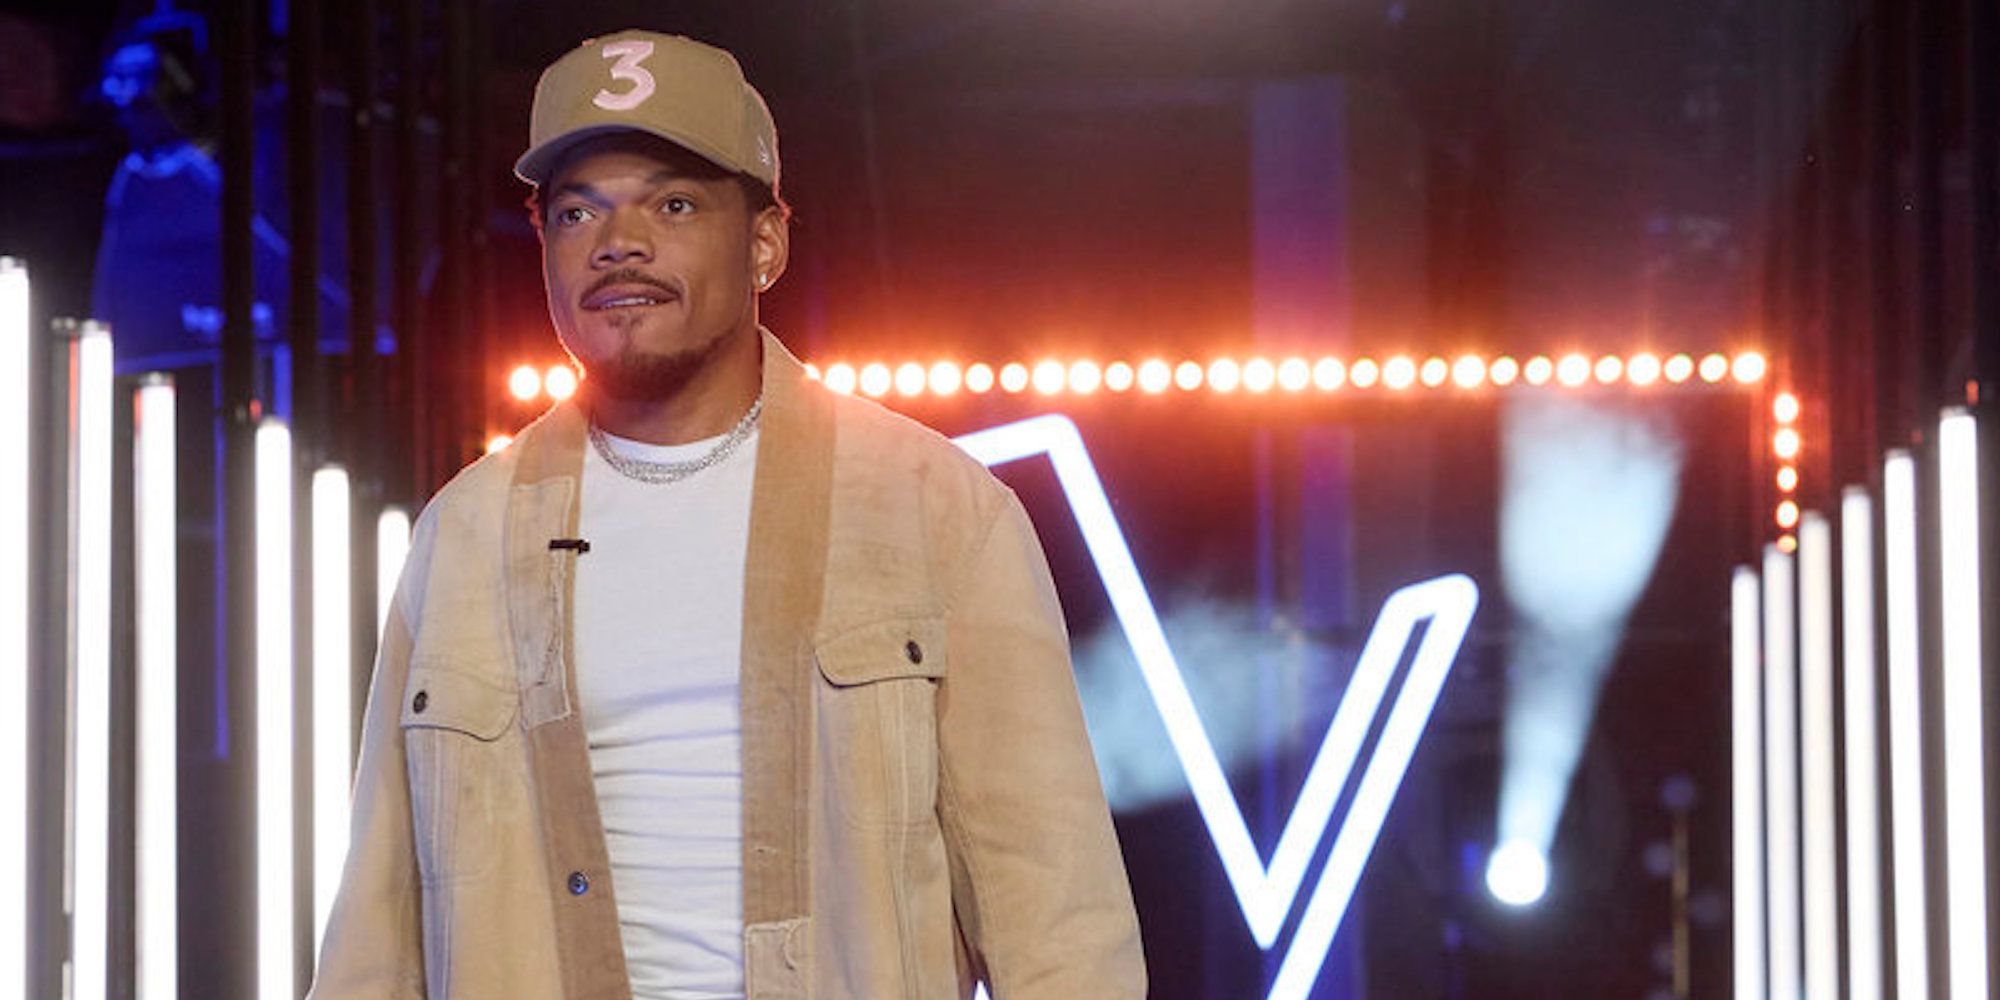 Promotional photo for 'The Voice' showing Chance the Rapper walking towards camera